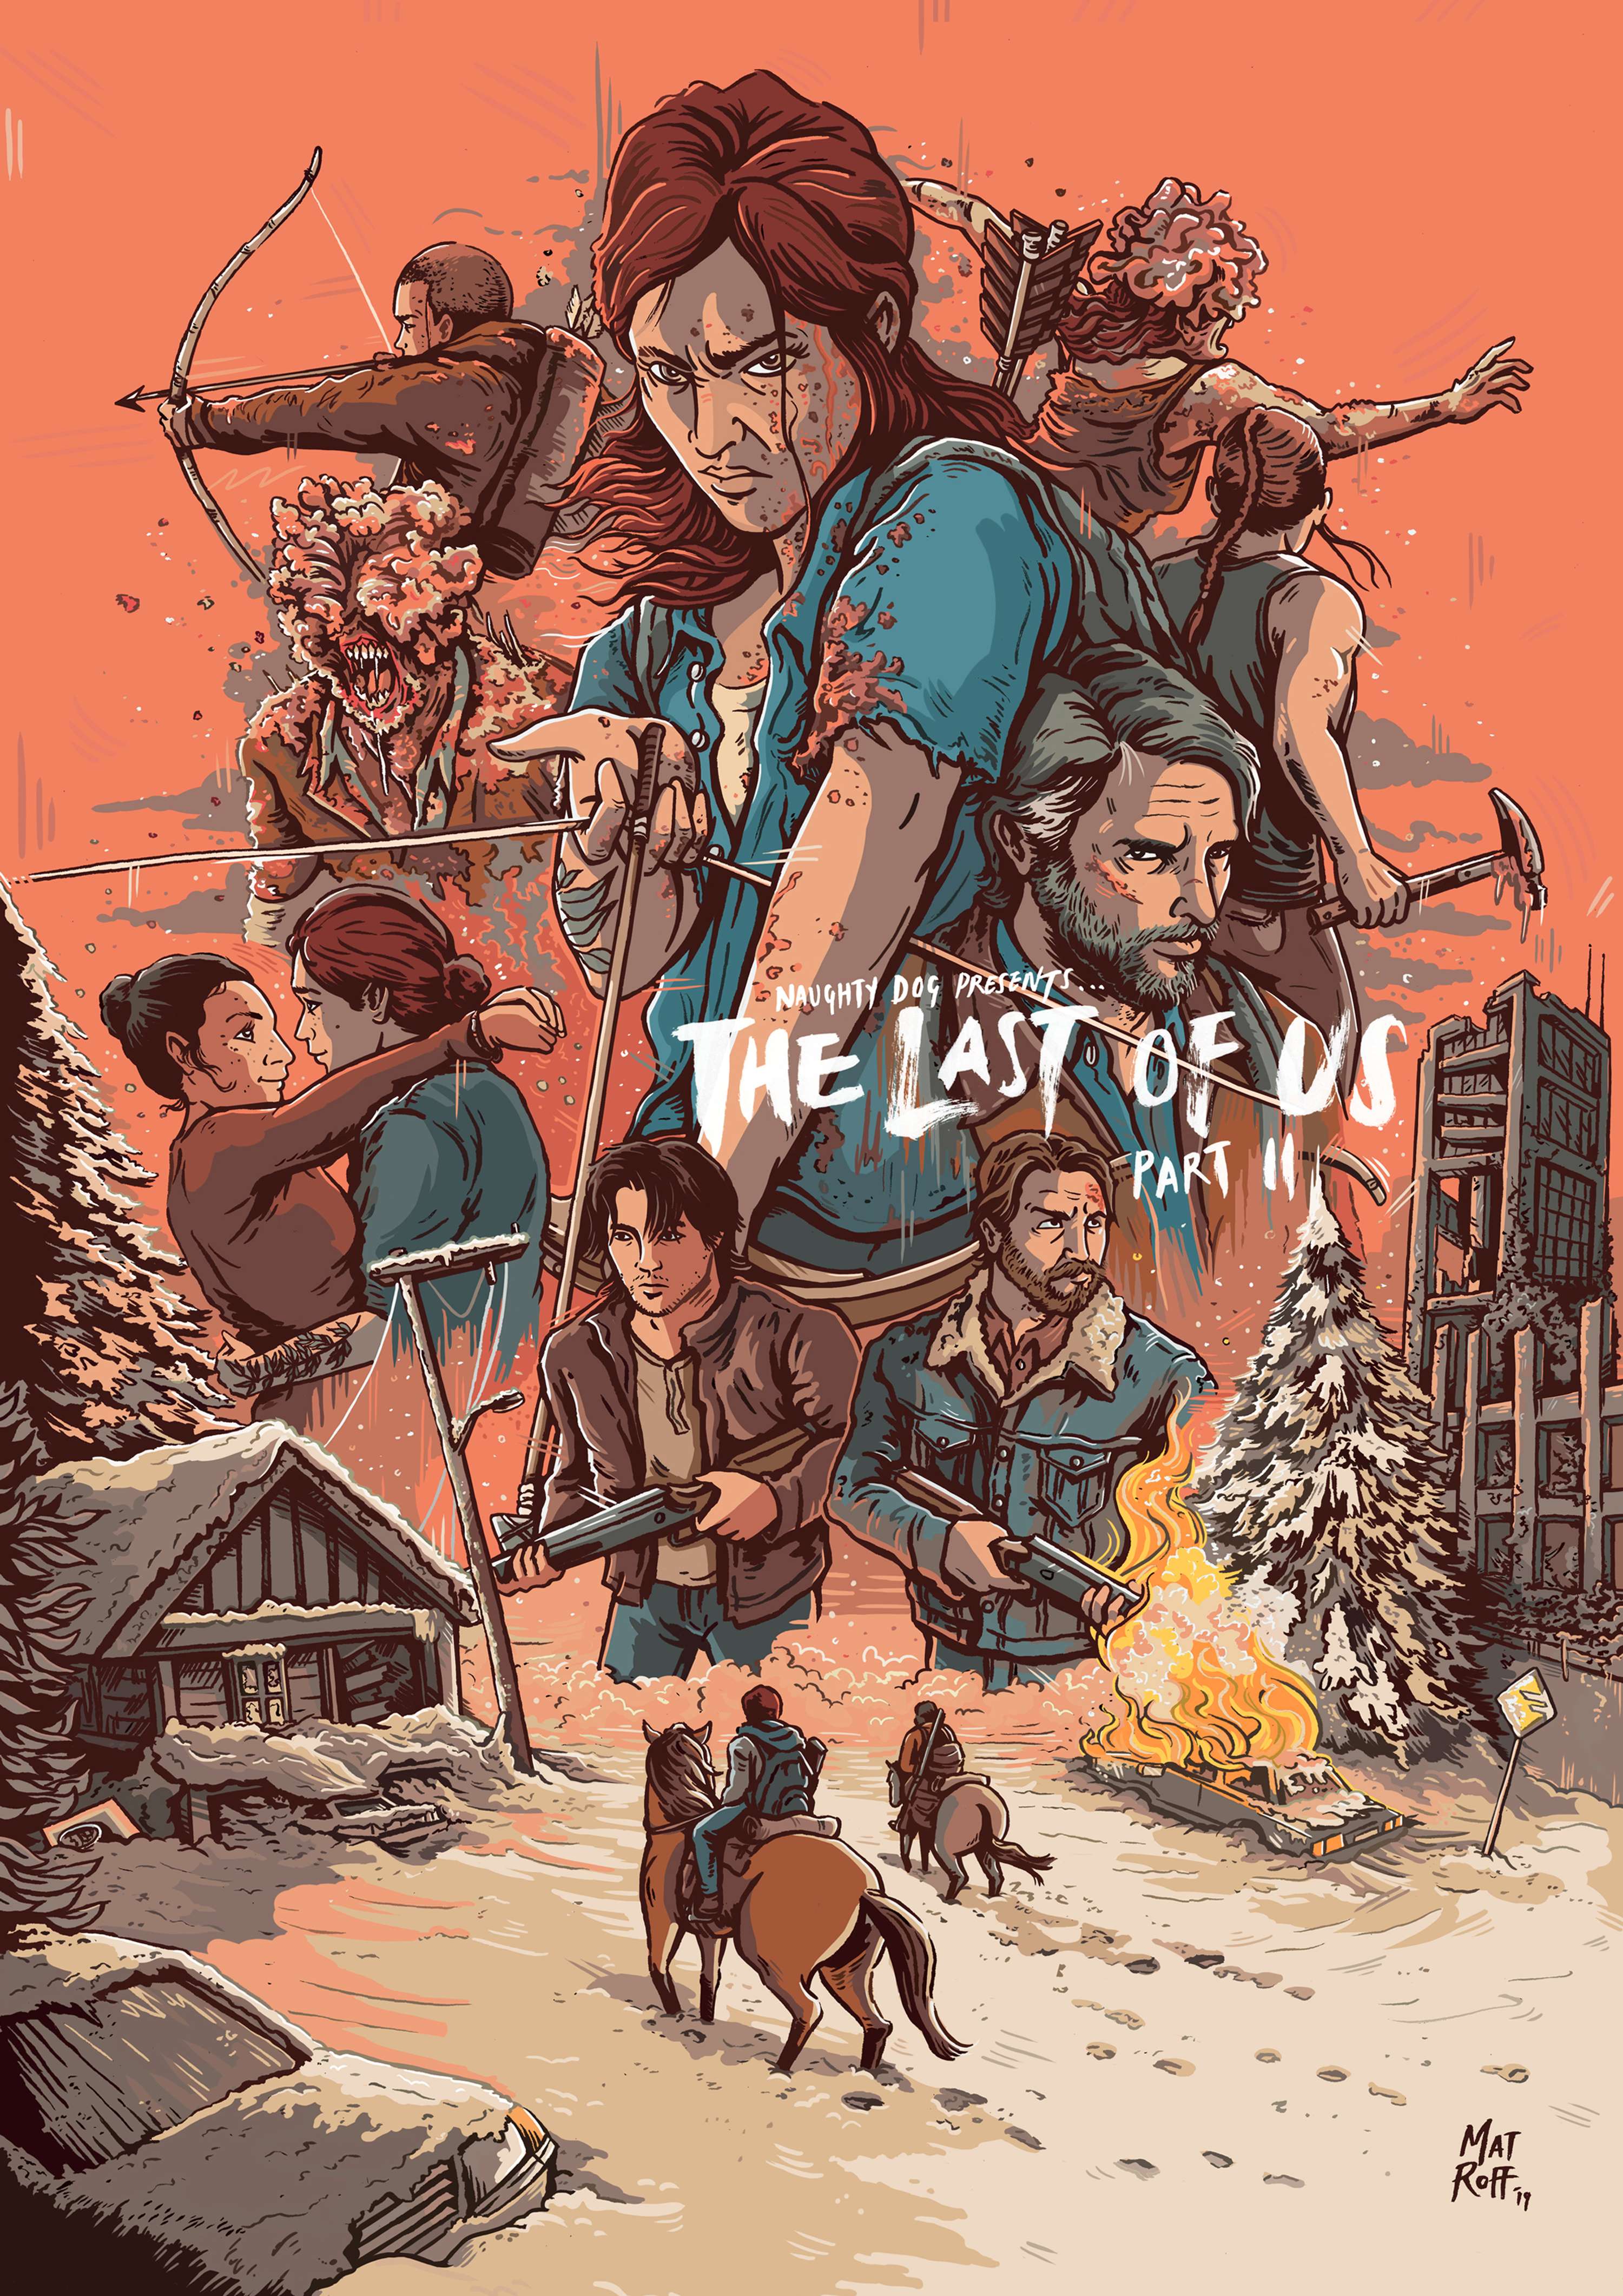 Artwork Ellie and Dog, The Last of Us Part II, Naughty Dog